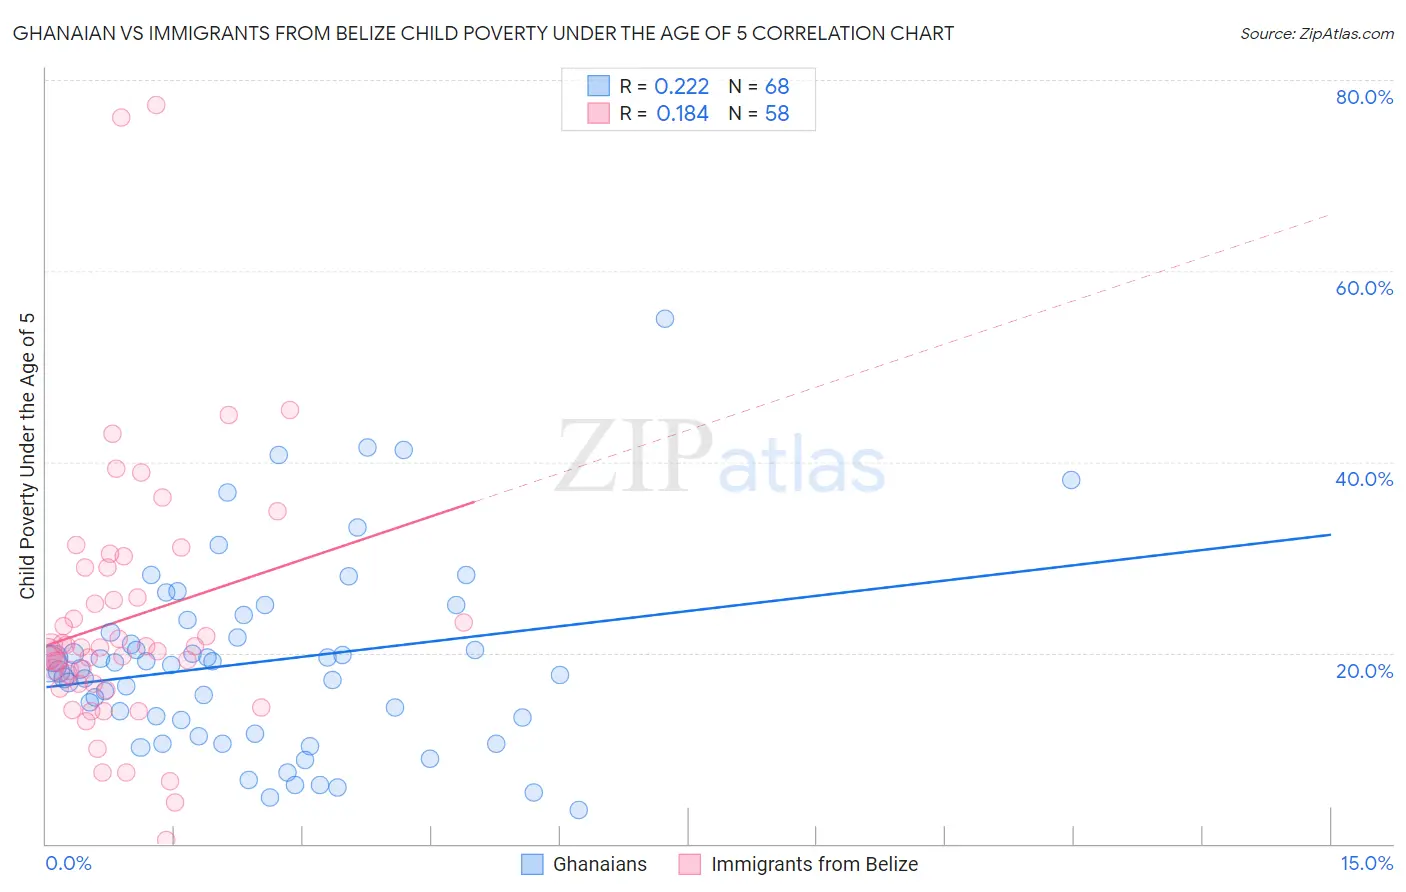 Ghanaian vs Immigrants from Belize Child Poverty Under the Age of 5